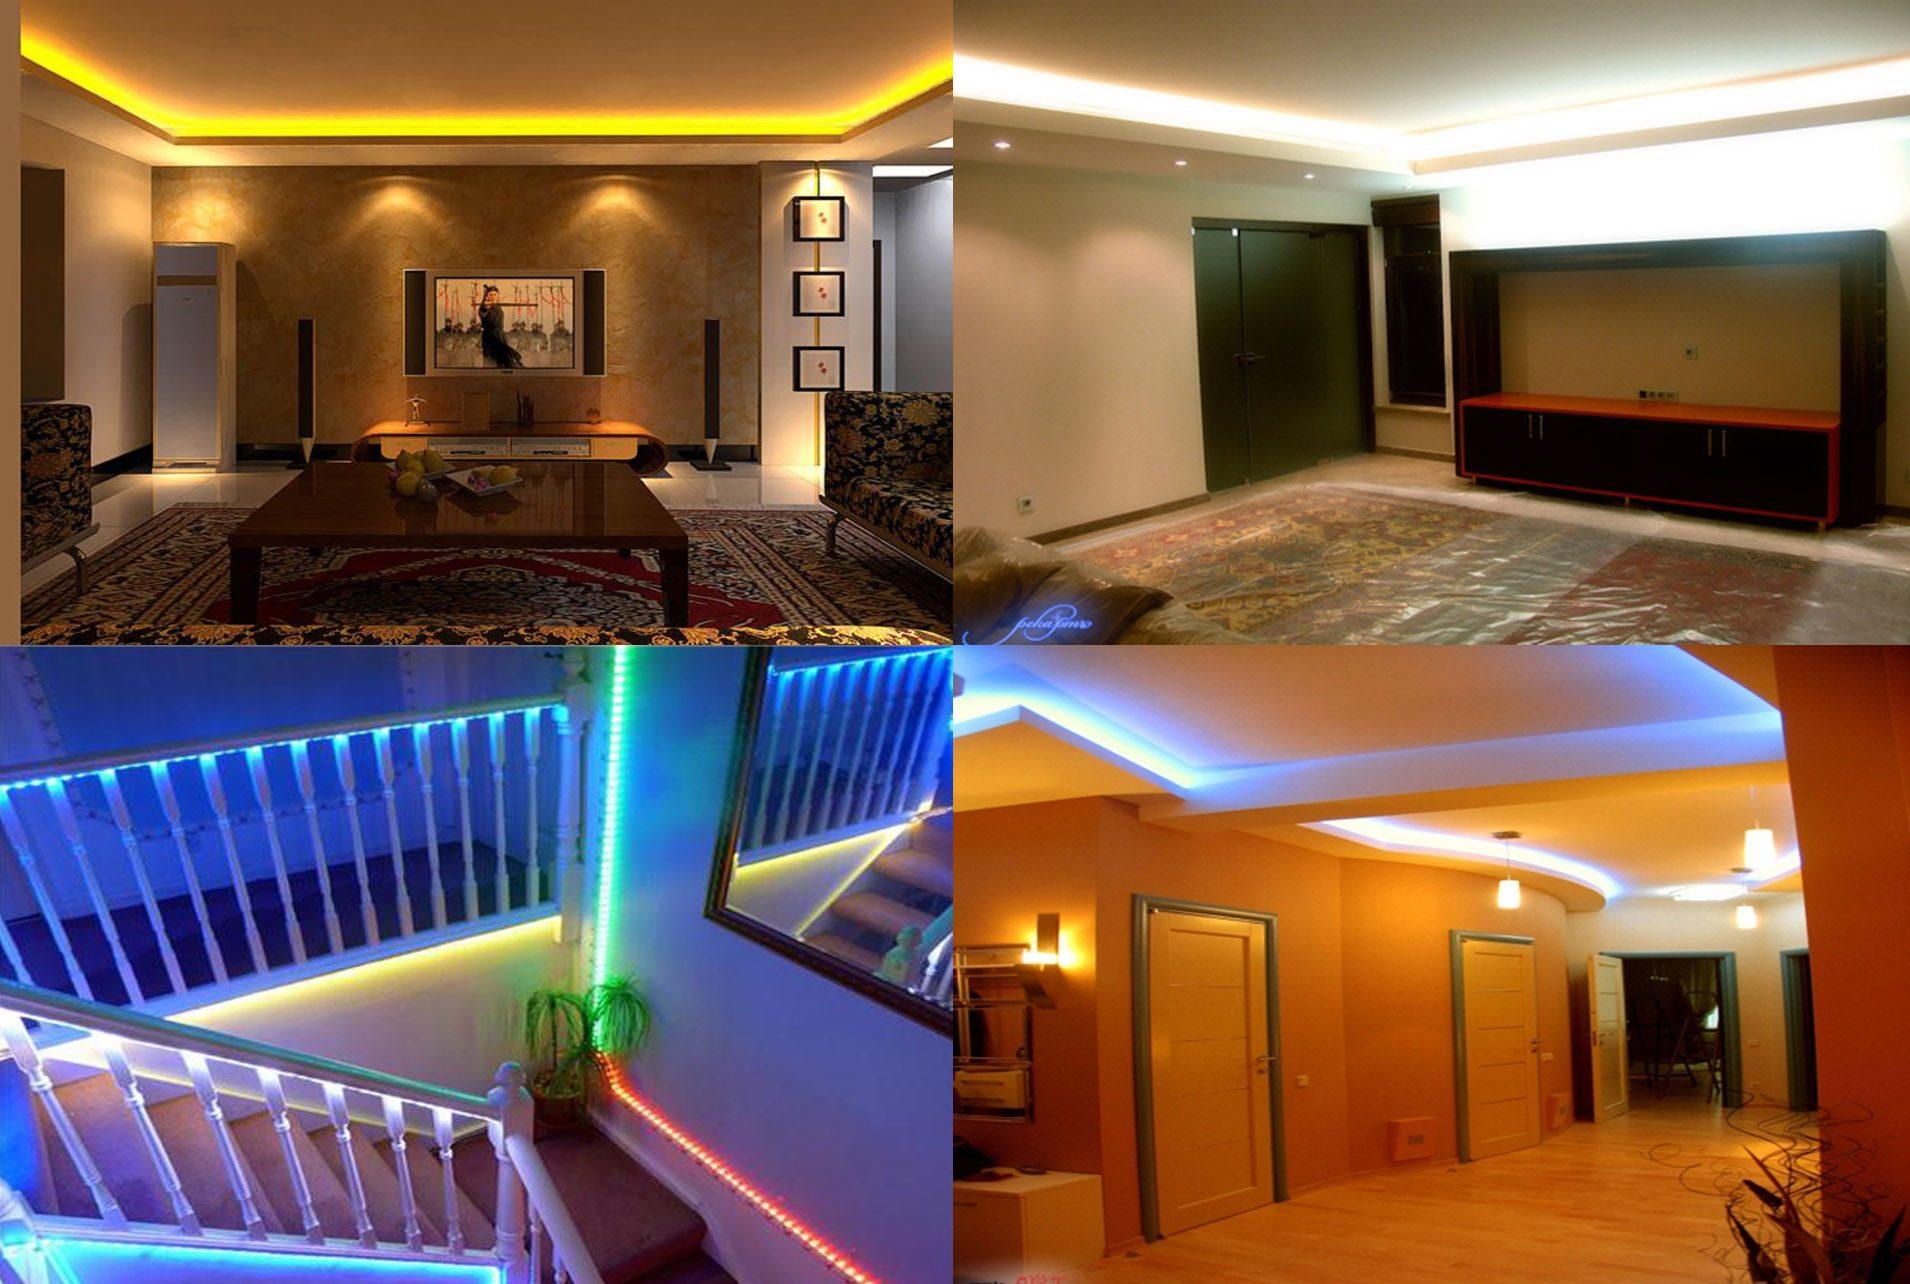 Buster reccomend Lighting strip for home